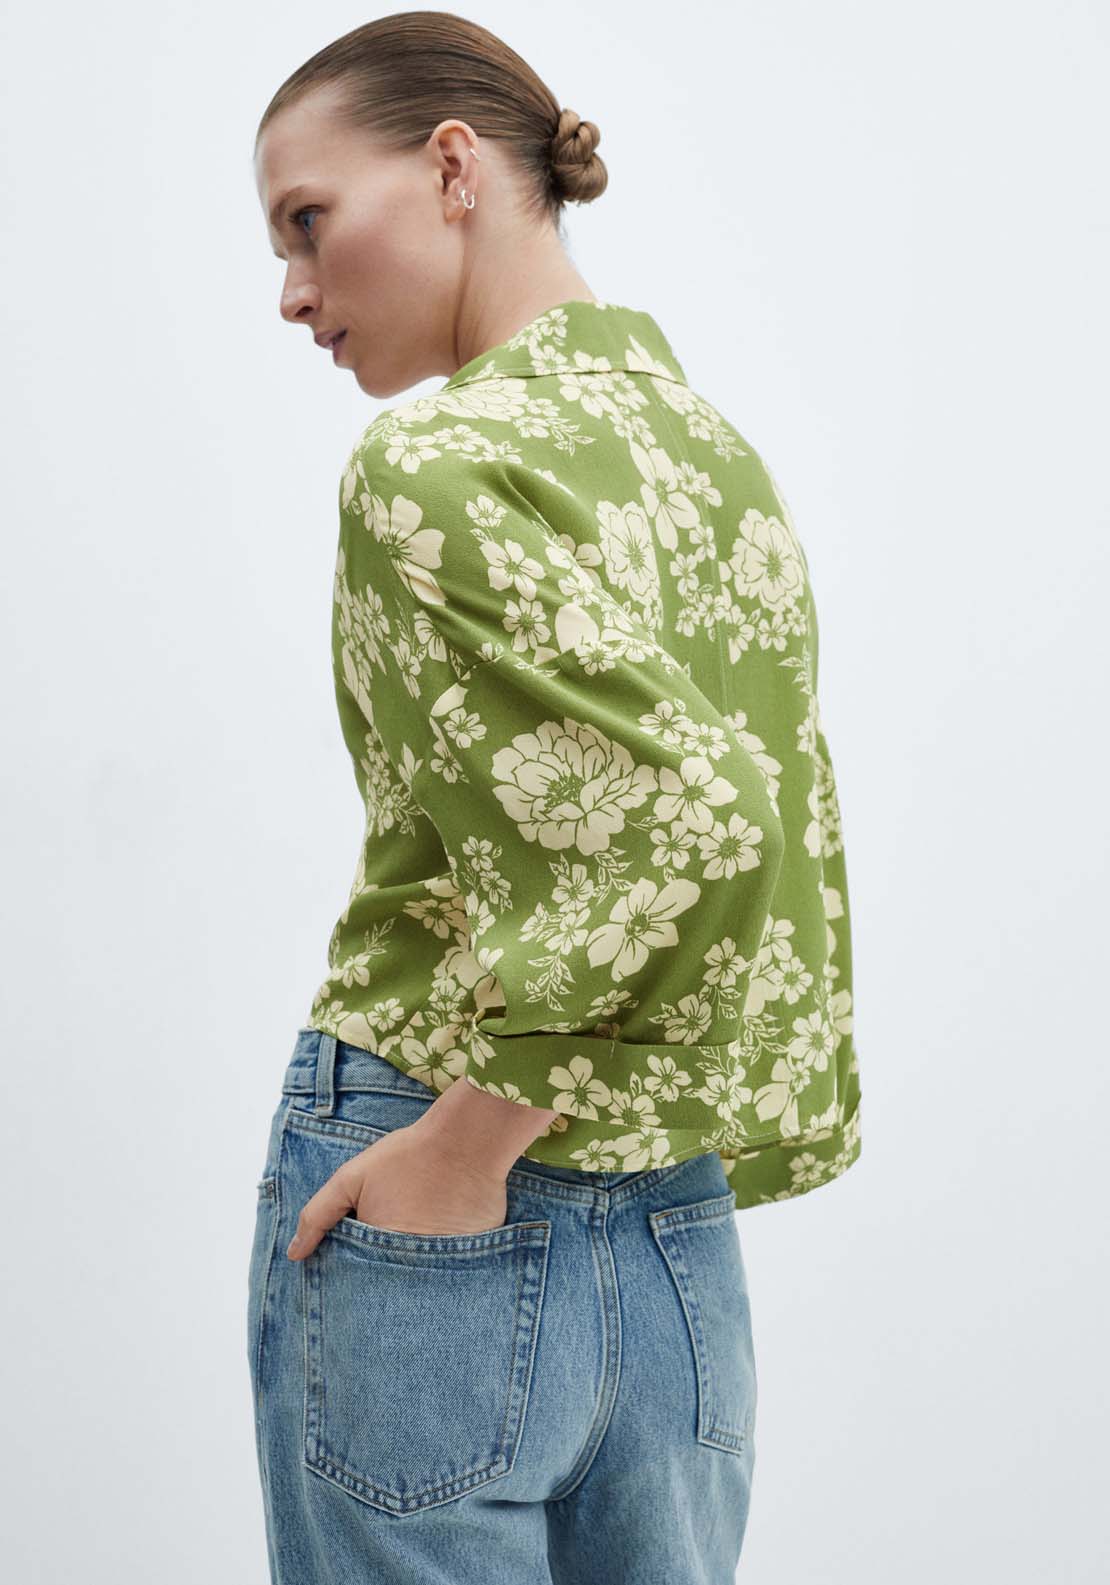 Mango Floral shirt with knot 3 Shaws Department Stores